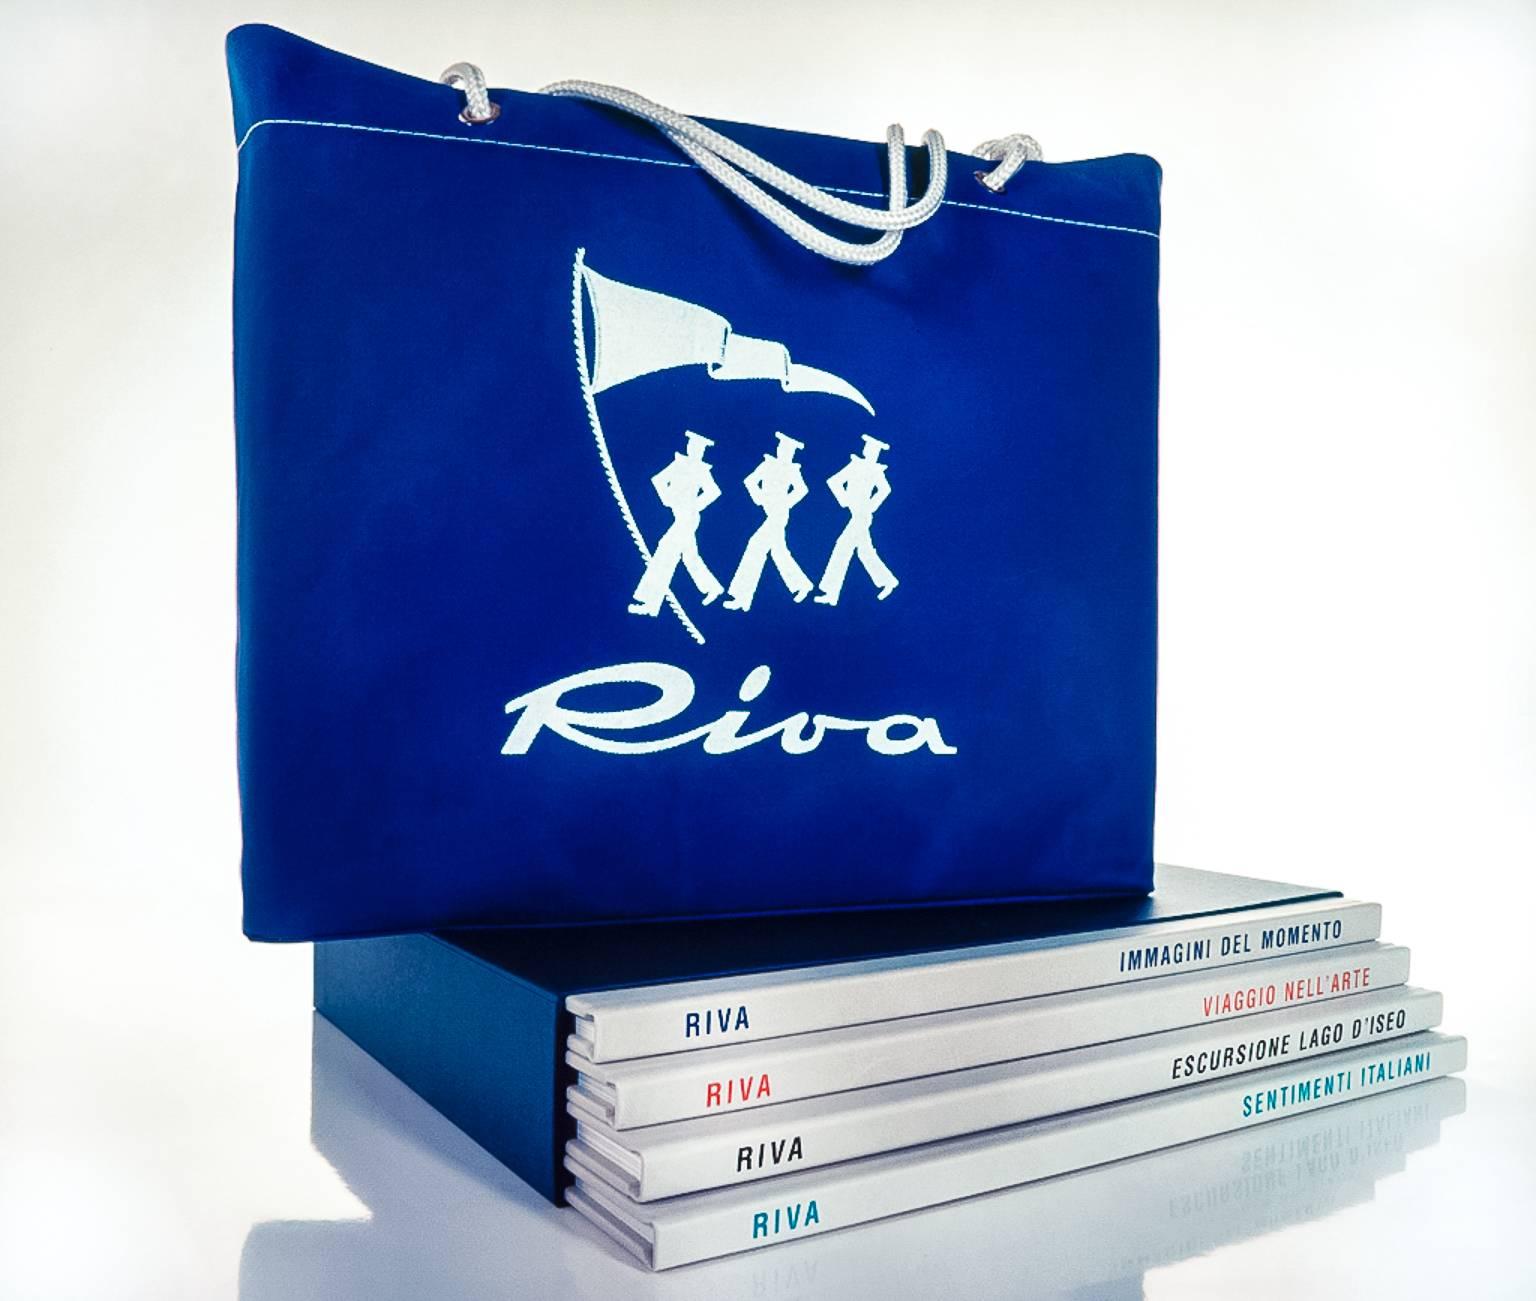 Classic RIVA Motorboat book edition (4 Volumes) - limited edition - Art by Olaf Tamm